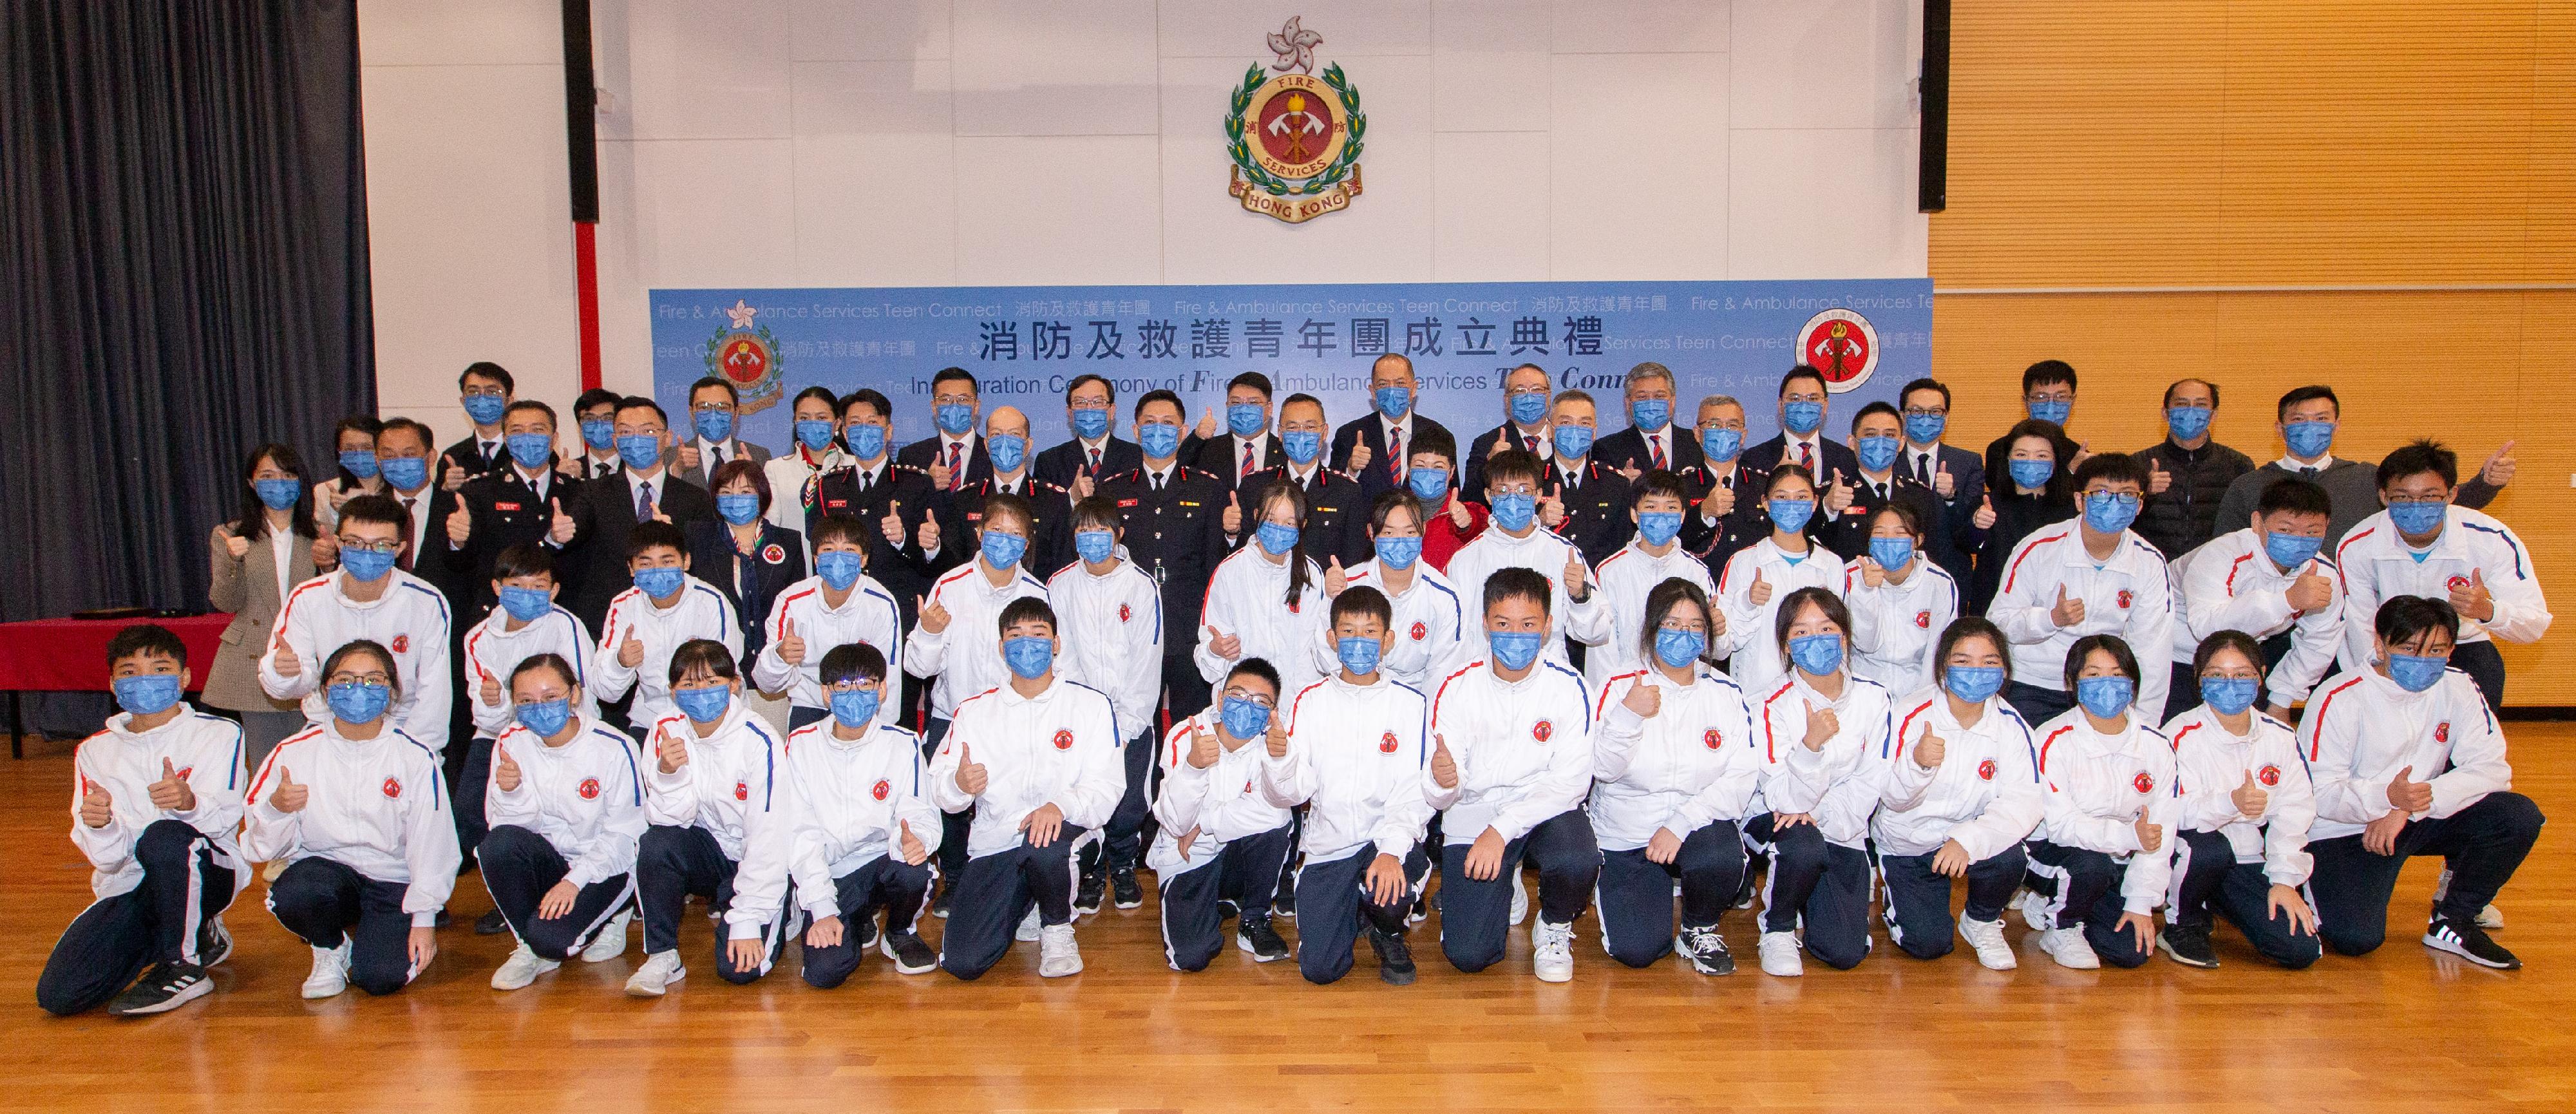 The Fire Services Department announced today (December 14) that it has established the Fire and Ambulance Services Teen Connect with an aim to provide a wide range of practical training programmes for youth. Photo shows the Director of Fire Services, Mr Joseph Leung (third row, sixth right), and the Deputy Director of Fire Services, Mr Andy Yeung (third row, seventh right), with representatives of participating schools.